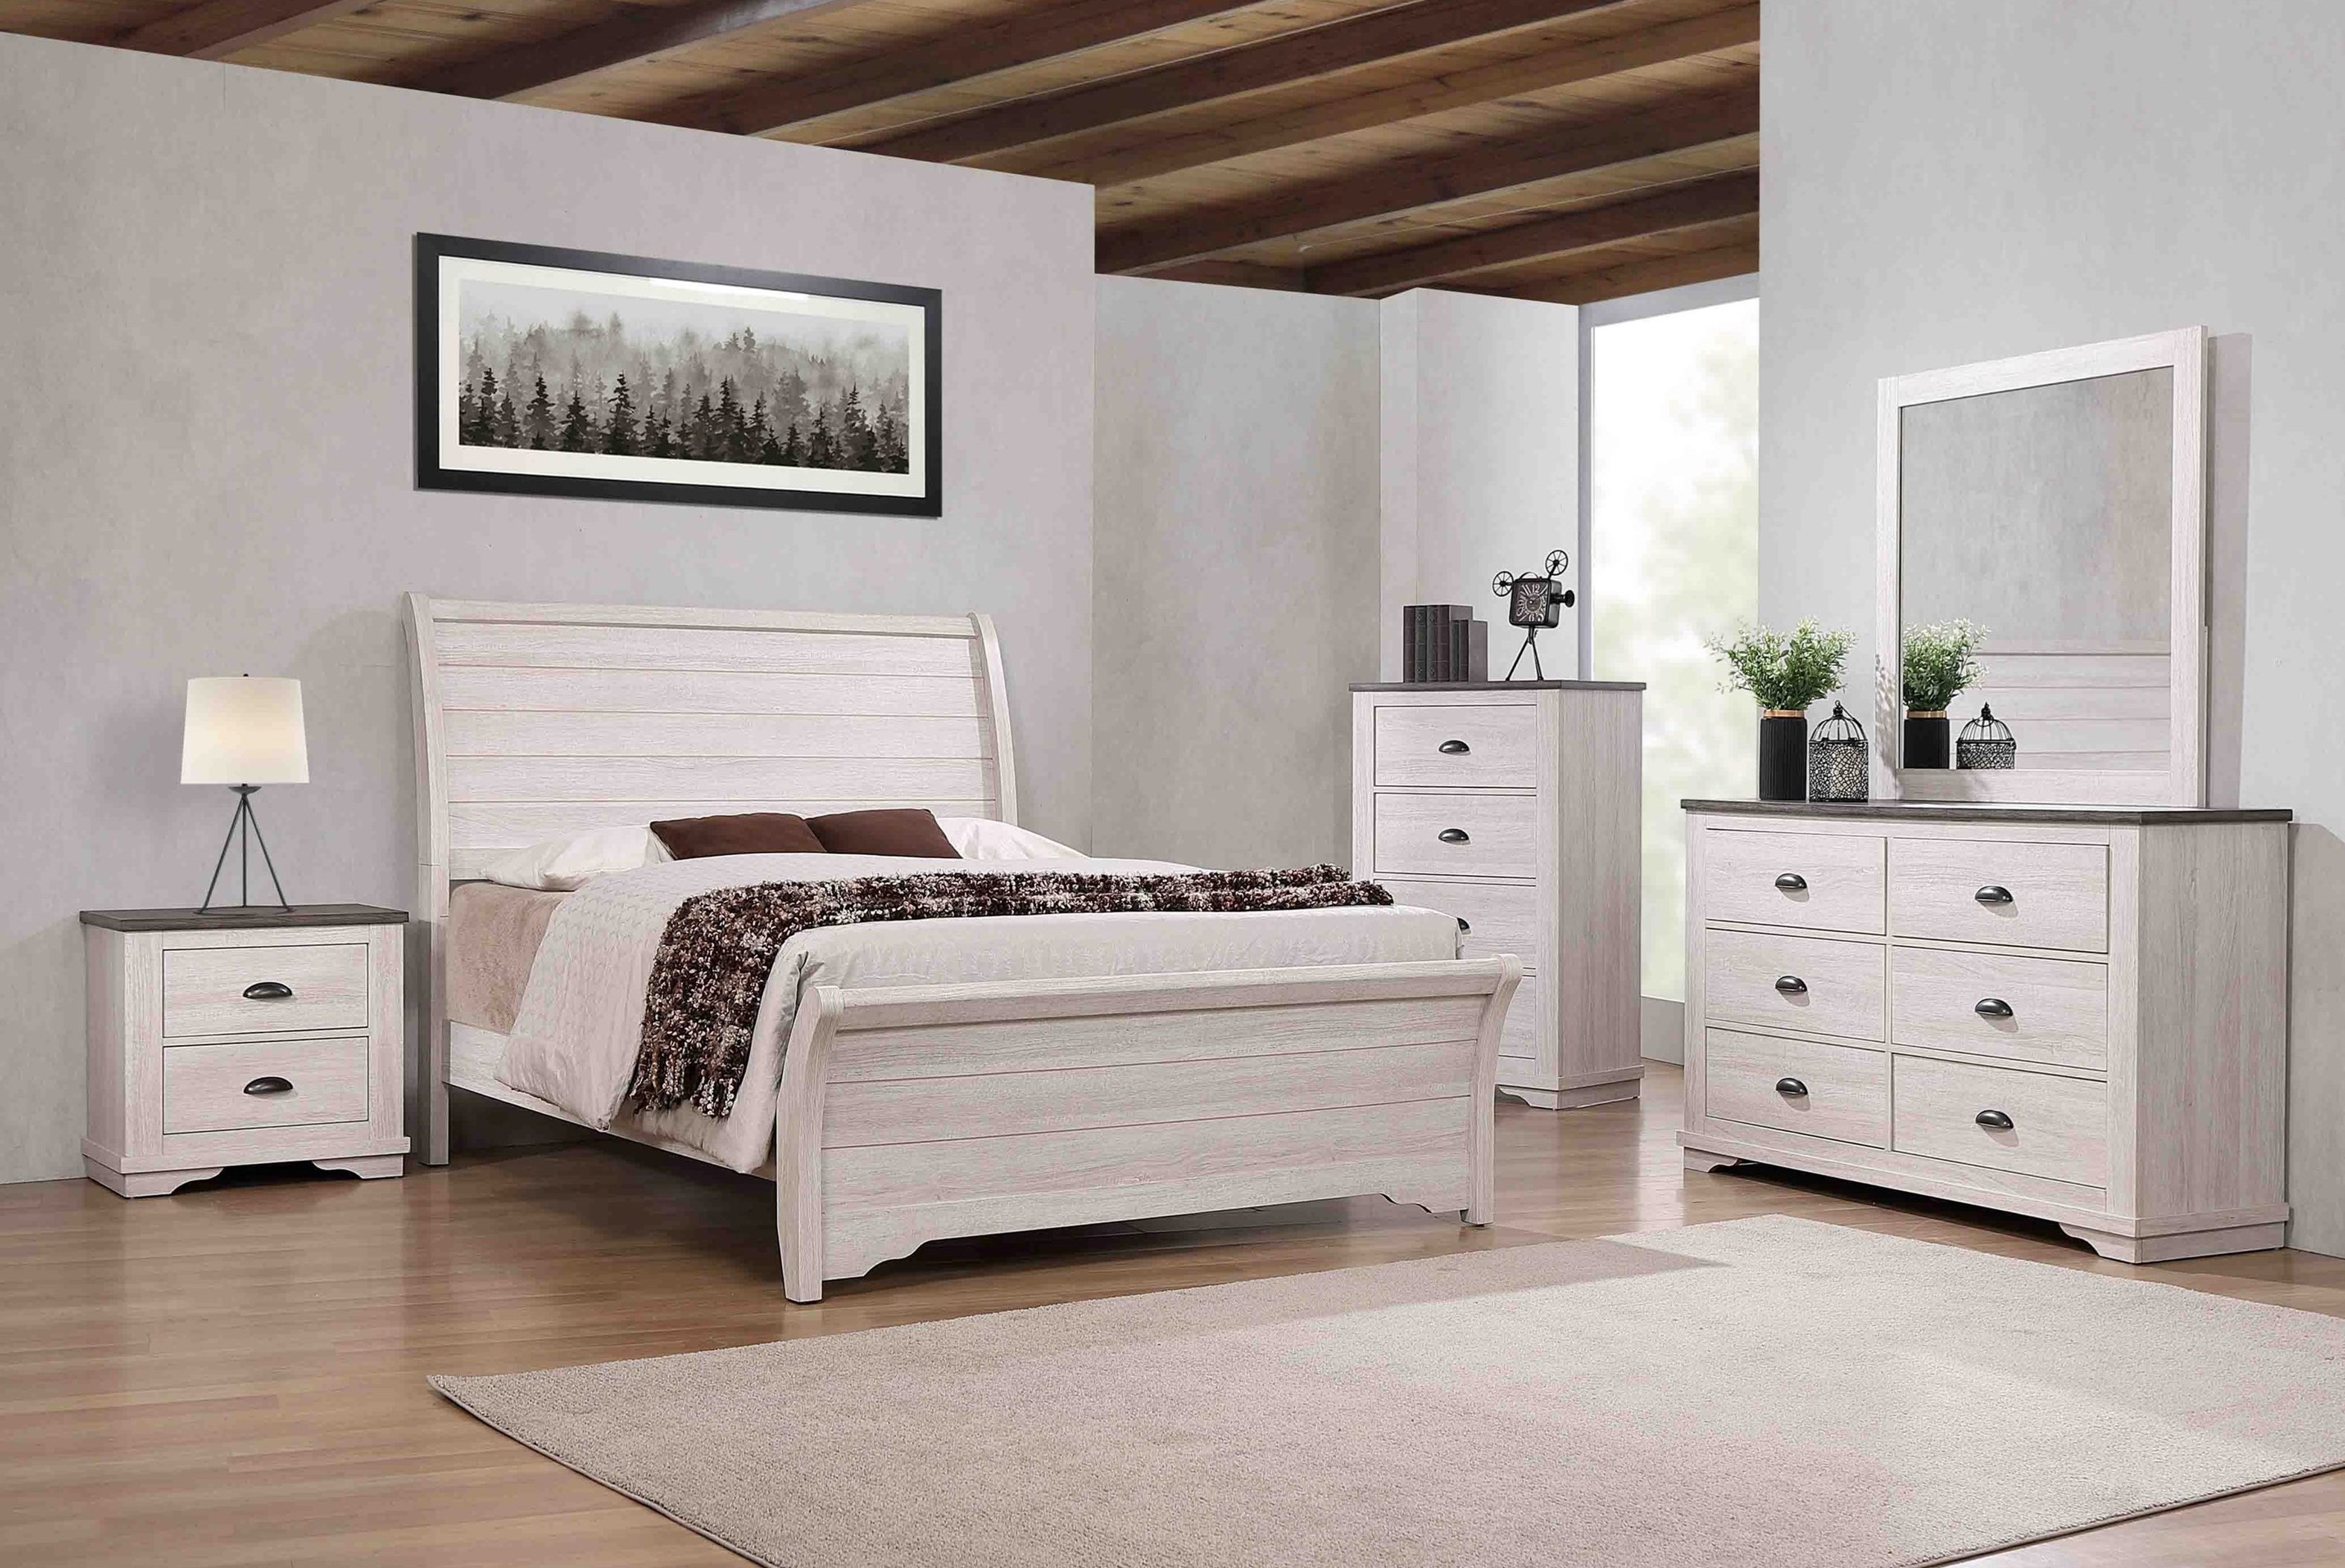 Transitional Style 5 Piece Queen Size, White Panel Bed Set, Dresser, Mirror, Nightstand, Elegant Look Furniture - image 1 of 6